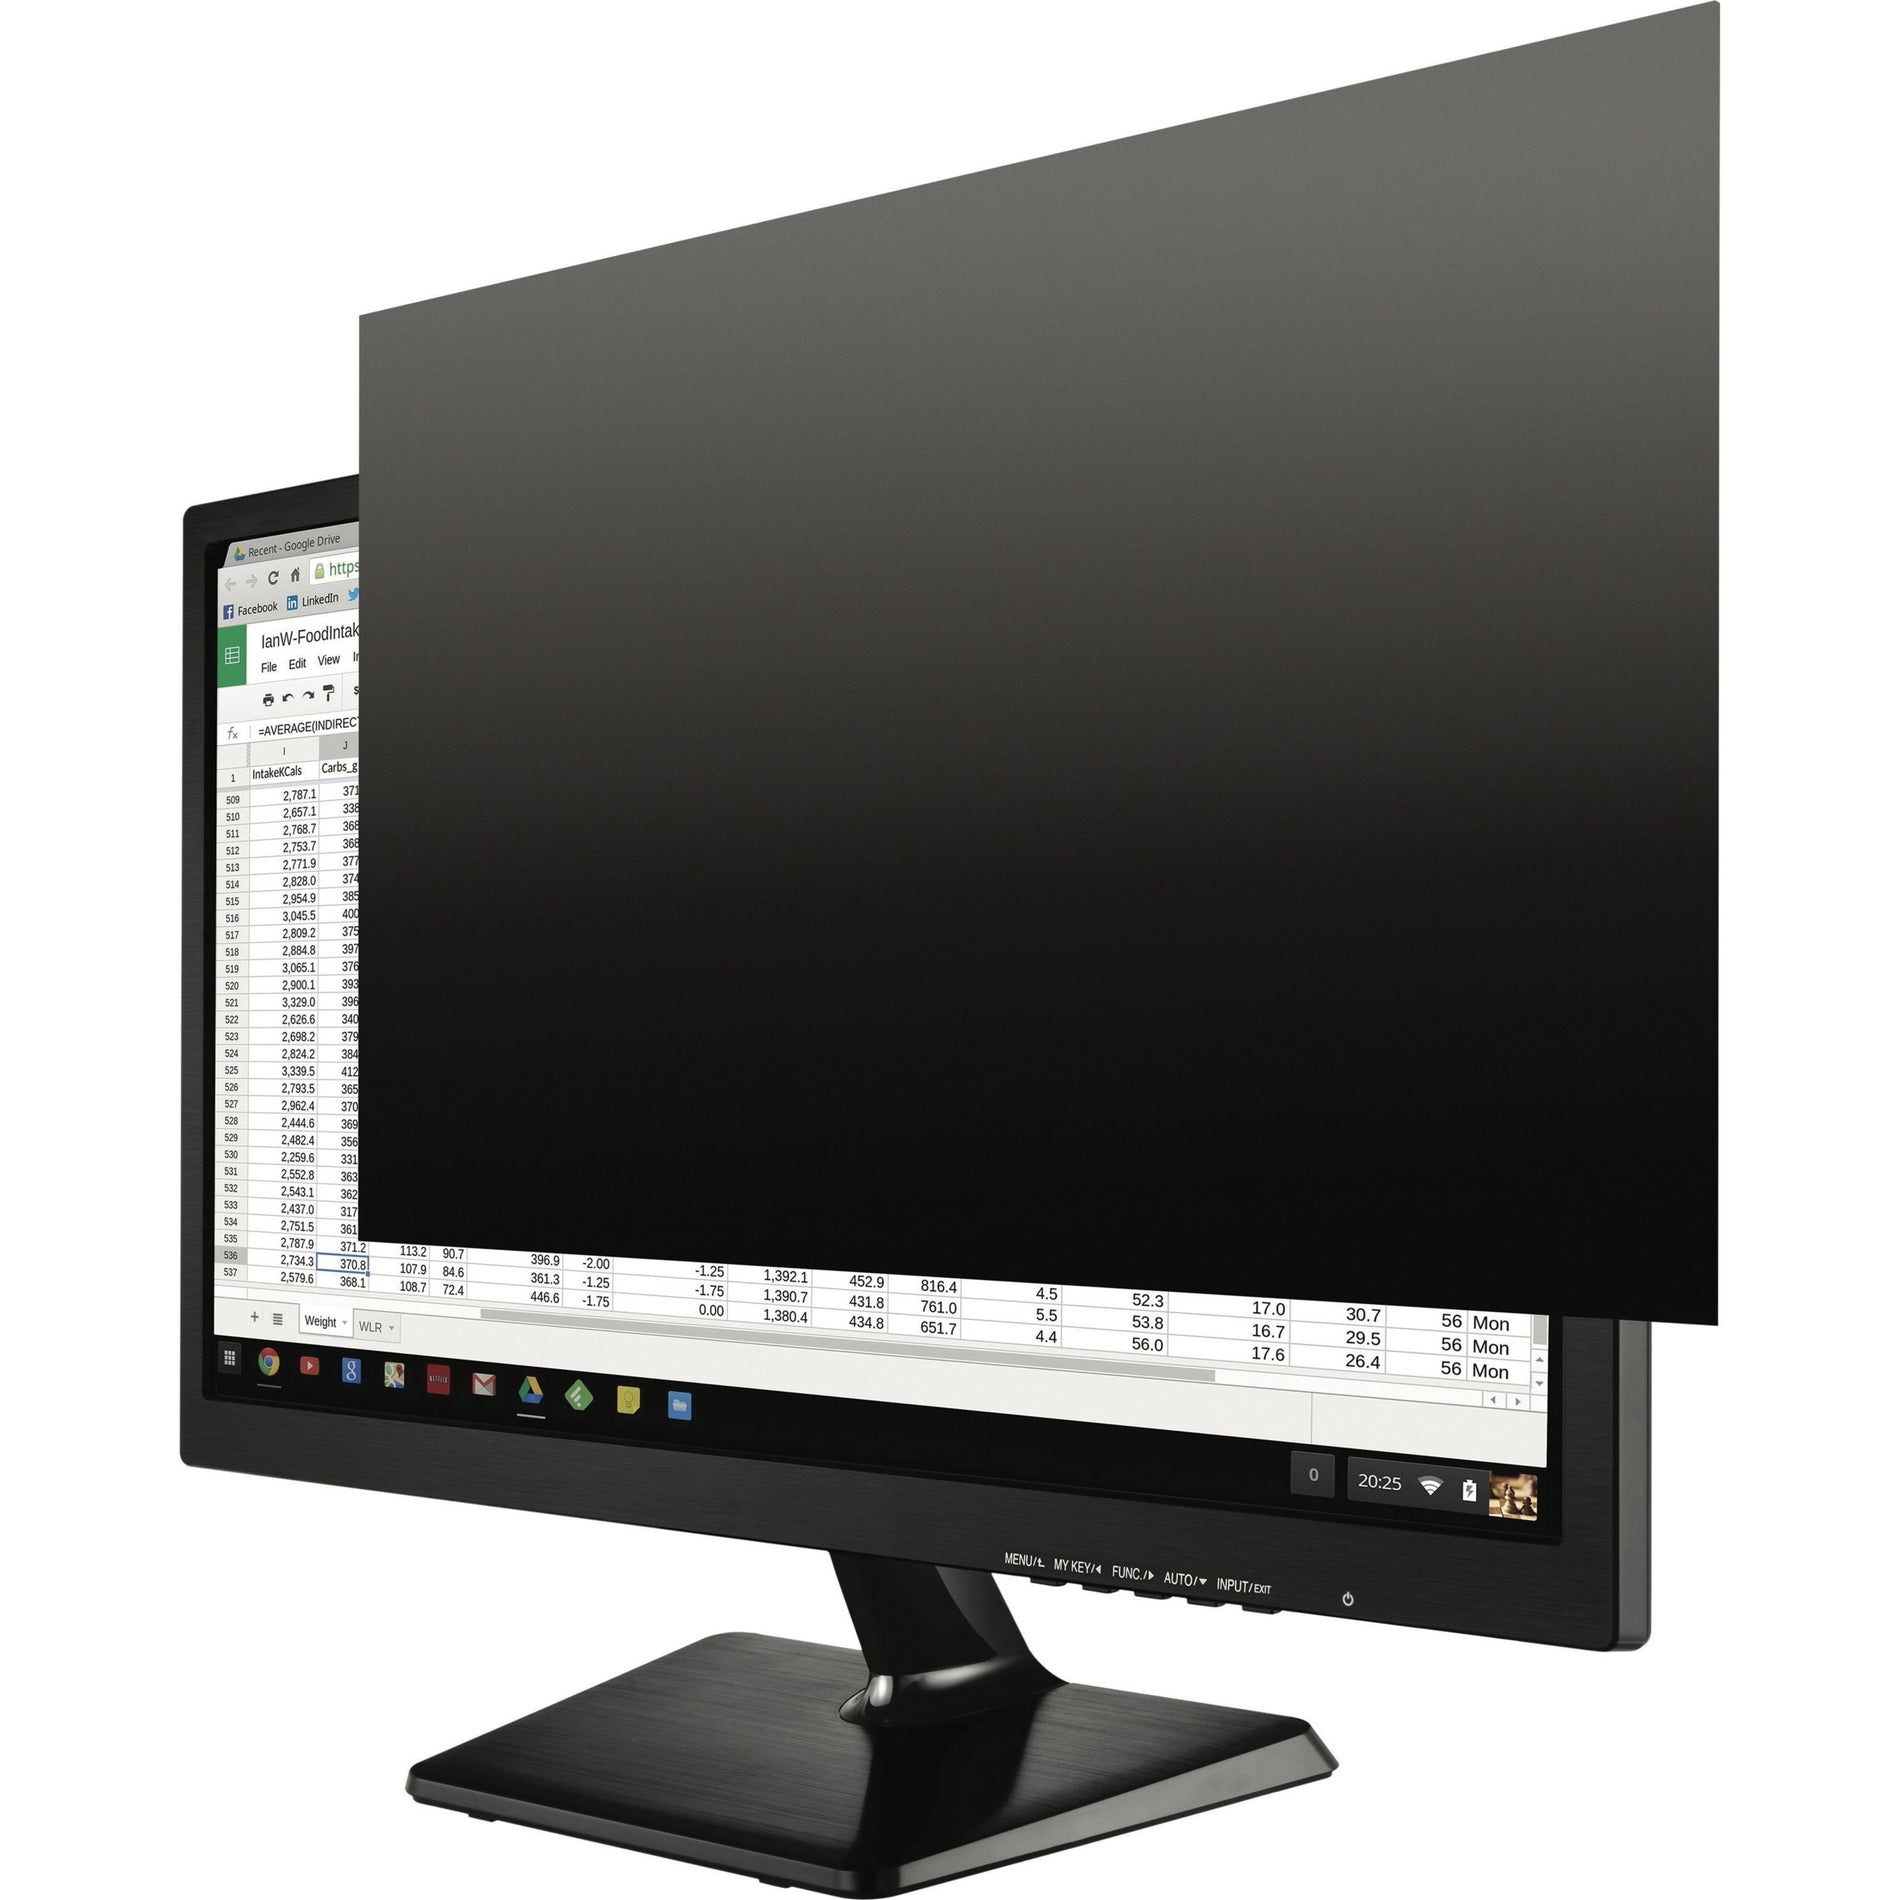 Kantek SVL19.0W Secure-View Blackout Privacy Filter - Fits 19" Widescreen LCD Monitors, Microlouver Privacy Technology, Anti-glare, Damage Resistant